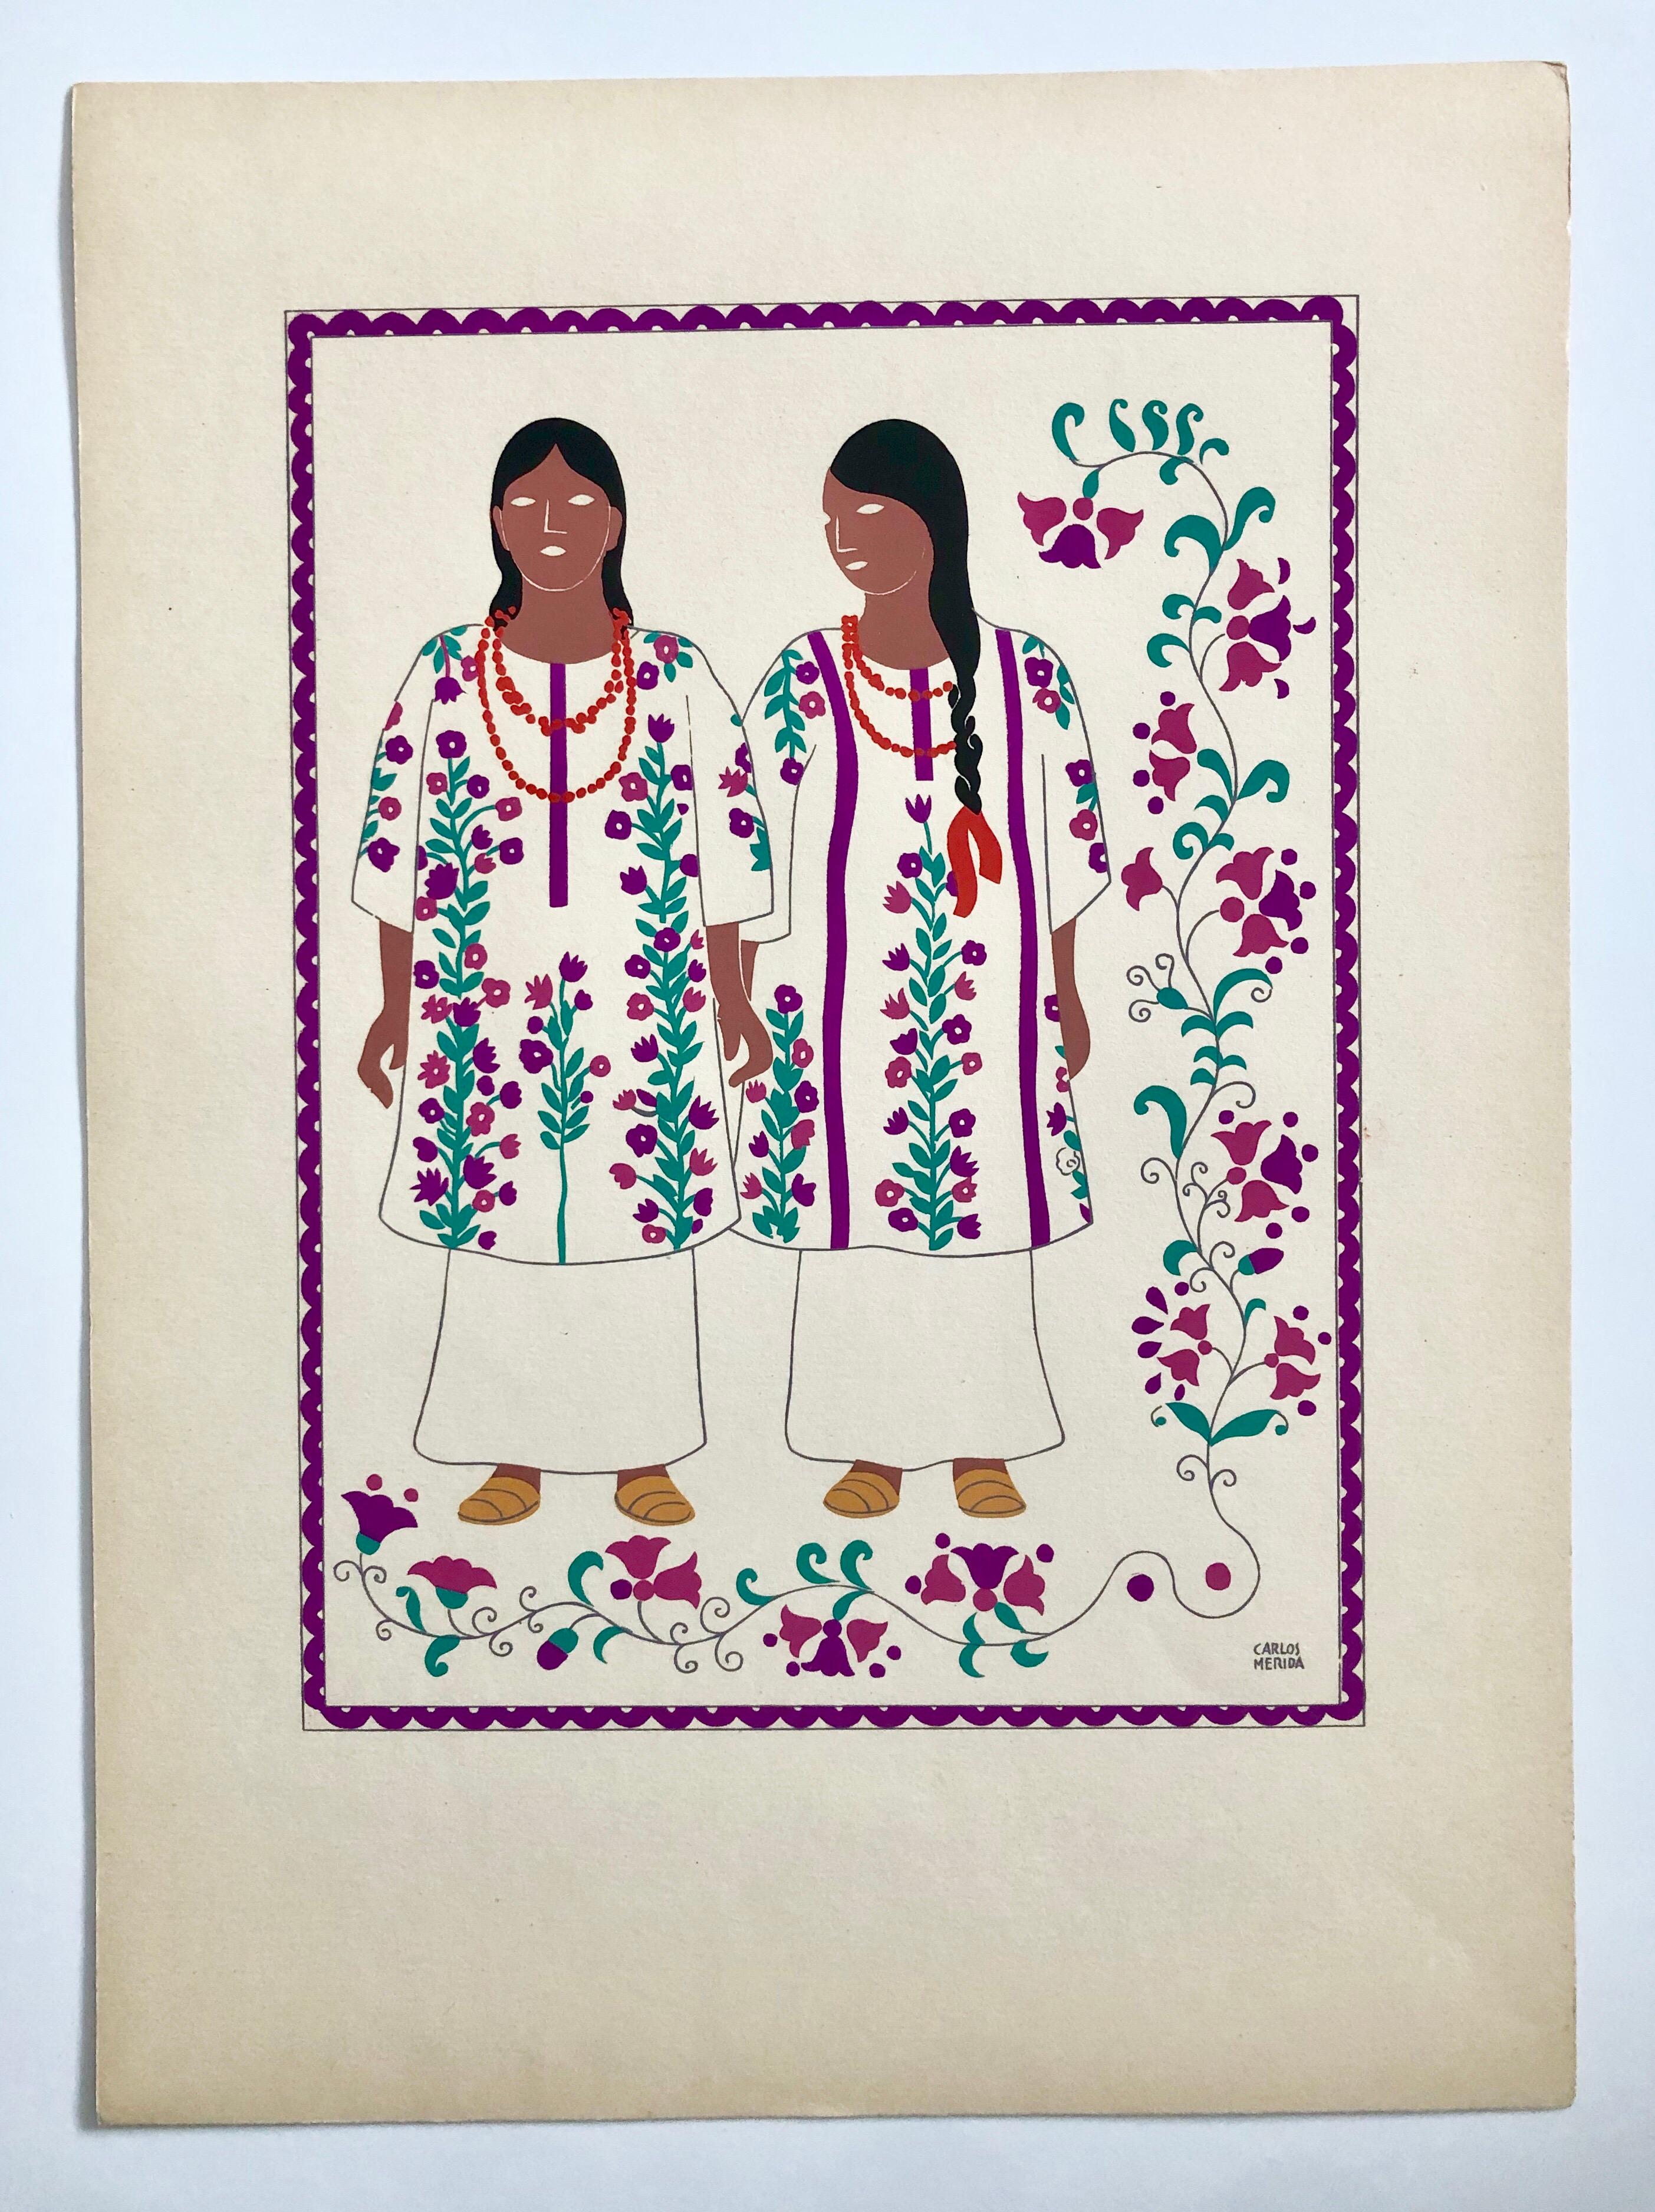 This listing is for the one Silkscreen serigraph piece listed here.
Mexico City, 1945. First edition. plate signed, limited edition of 1000, these serigraph plates depict various types of traditional and folk art indigenous clothing and costume